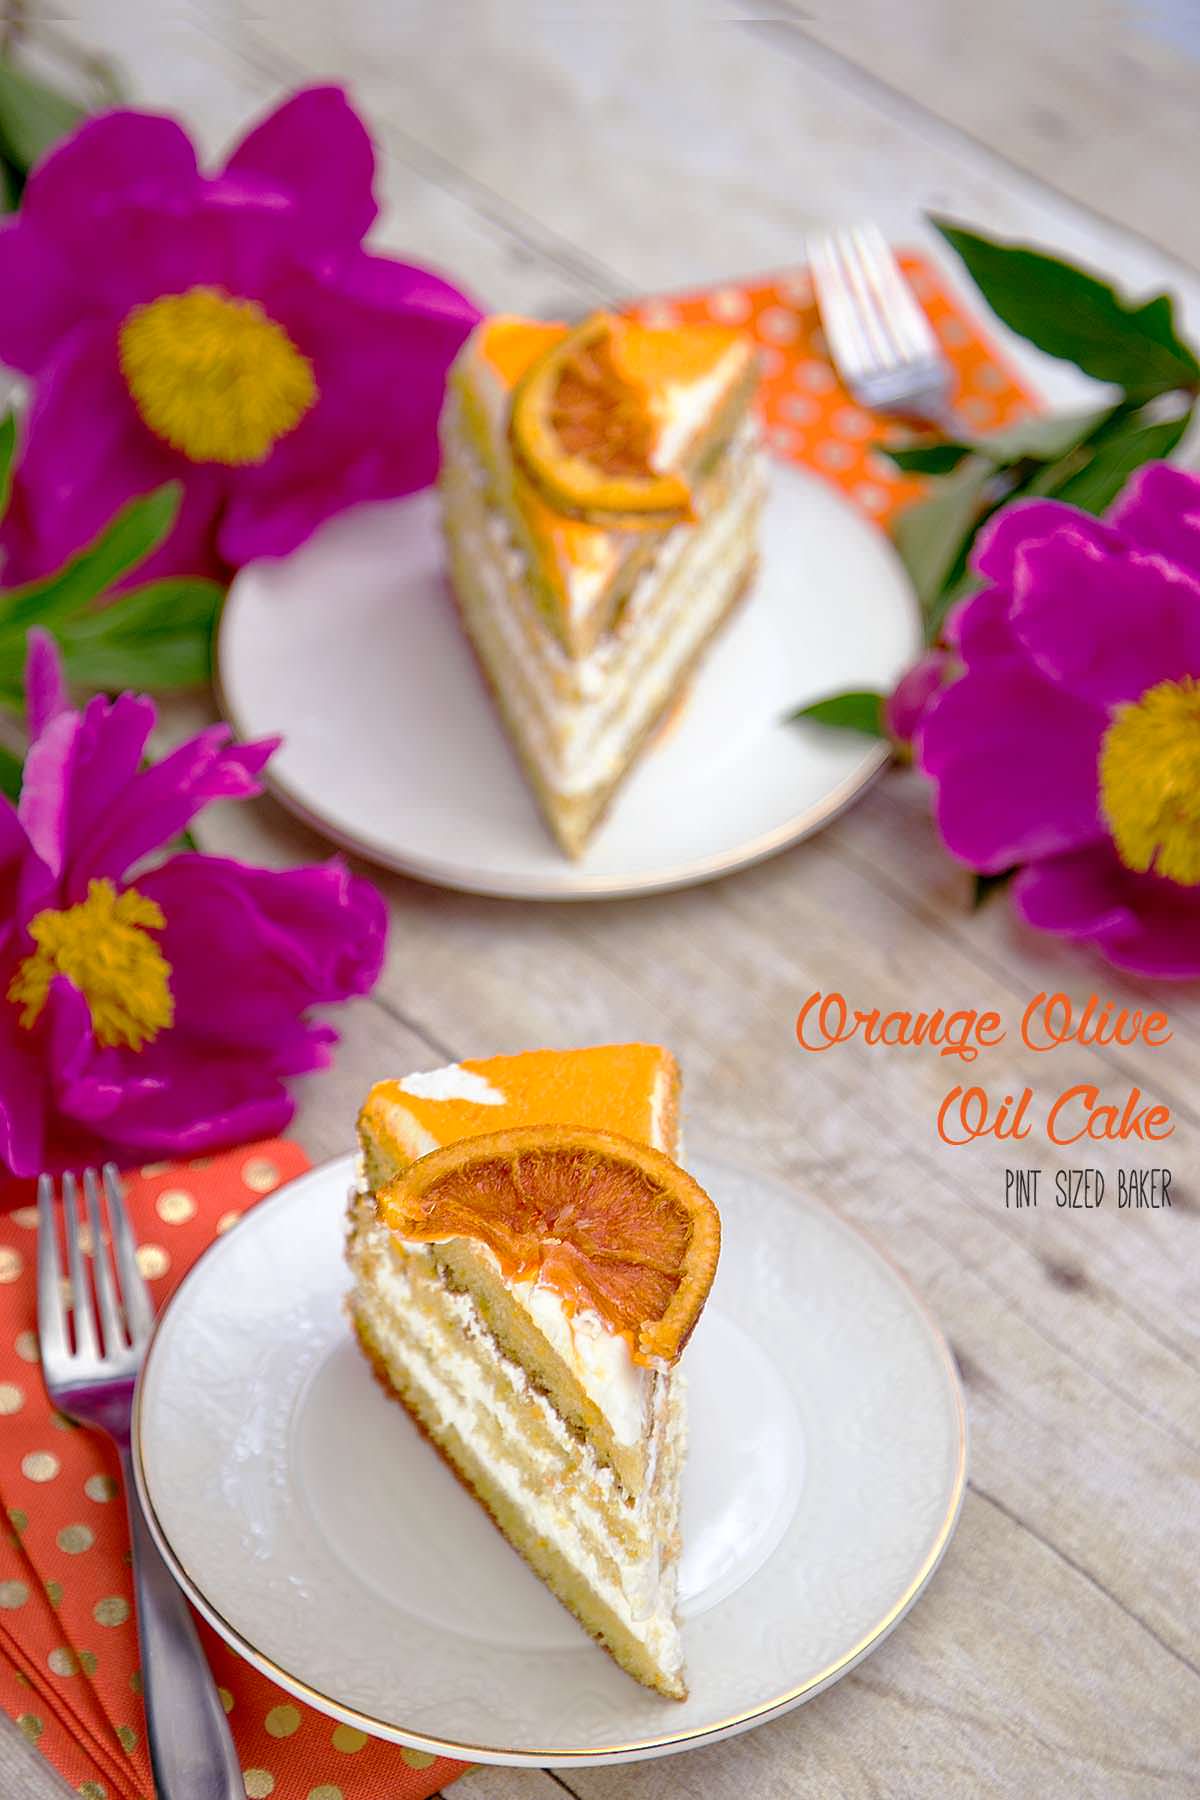 Light and fluffy layers of Orange Olive Oil Cake with whipped cream frosting and a candied orange slice on top.